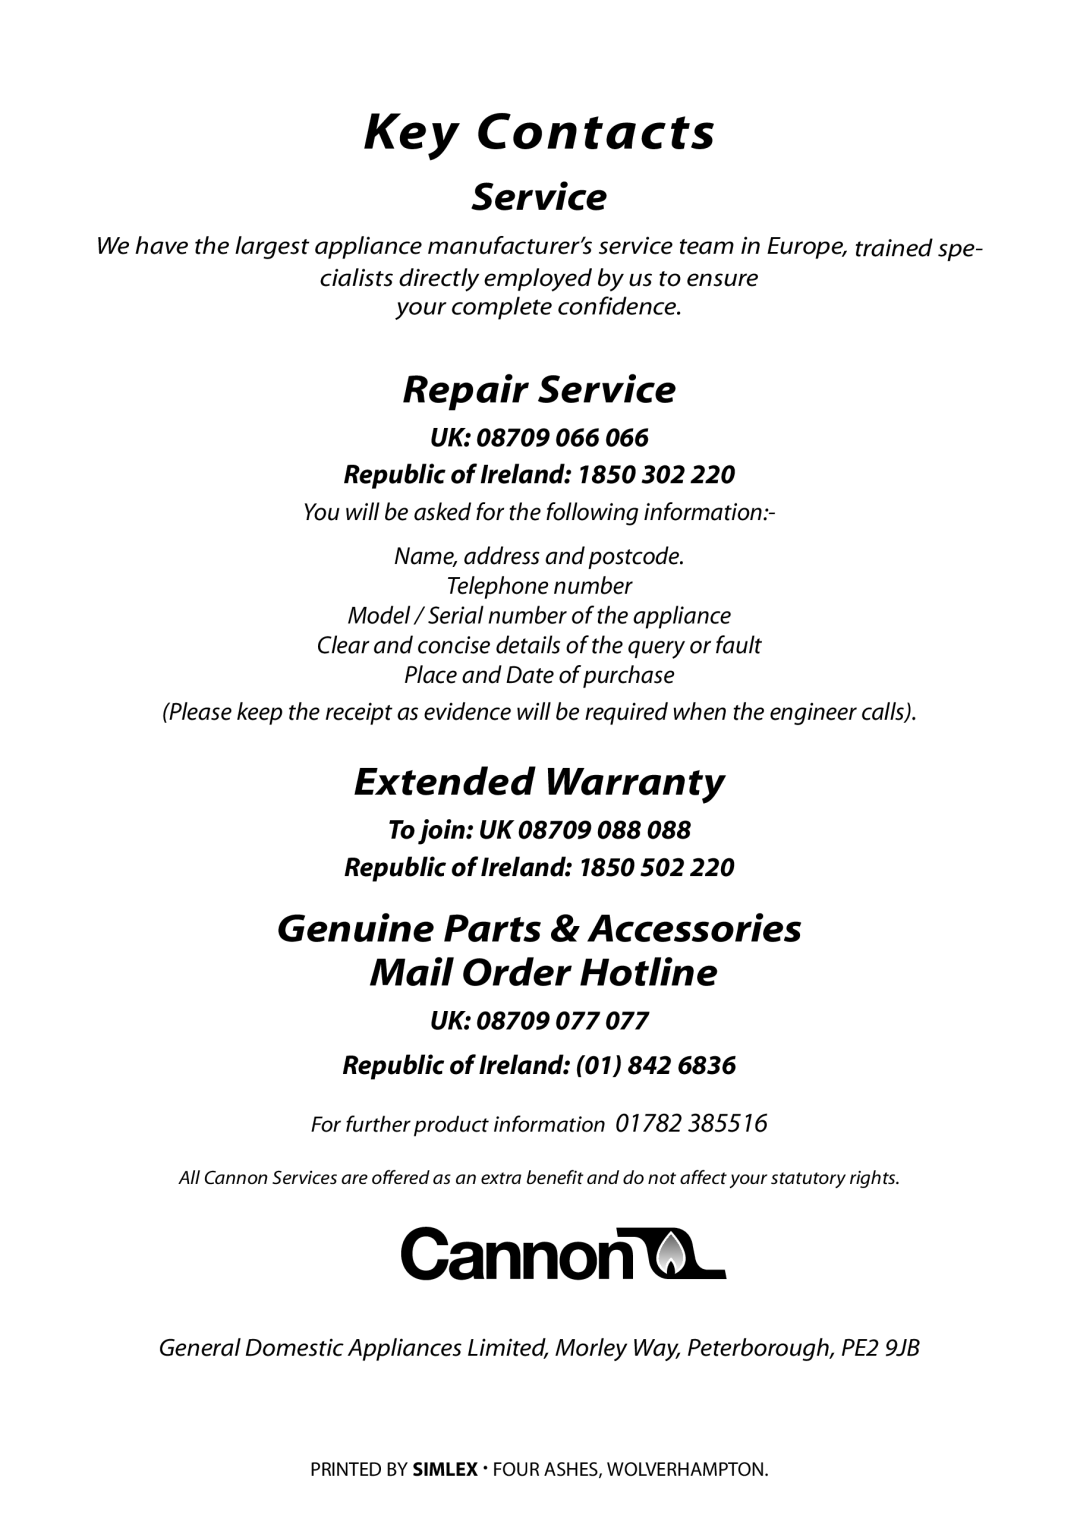 Cannon 10250G, 10265G Key Contacts, Repair Service, Extended Warranty, Genuine Parts & Accessories Mail Order Hotline 